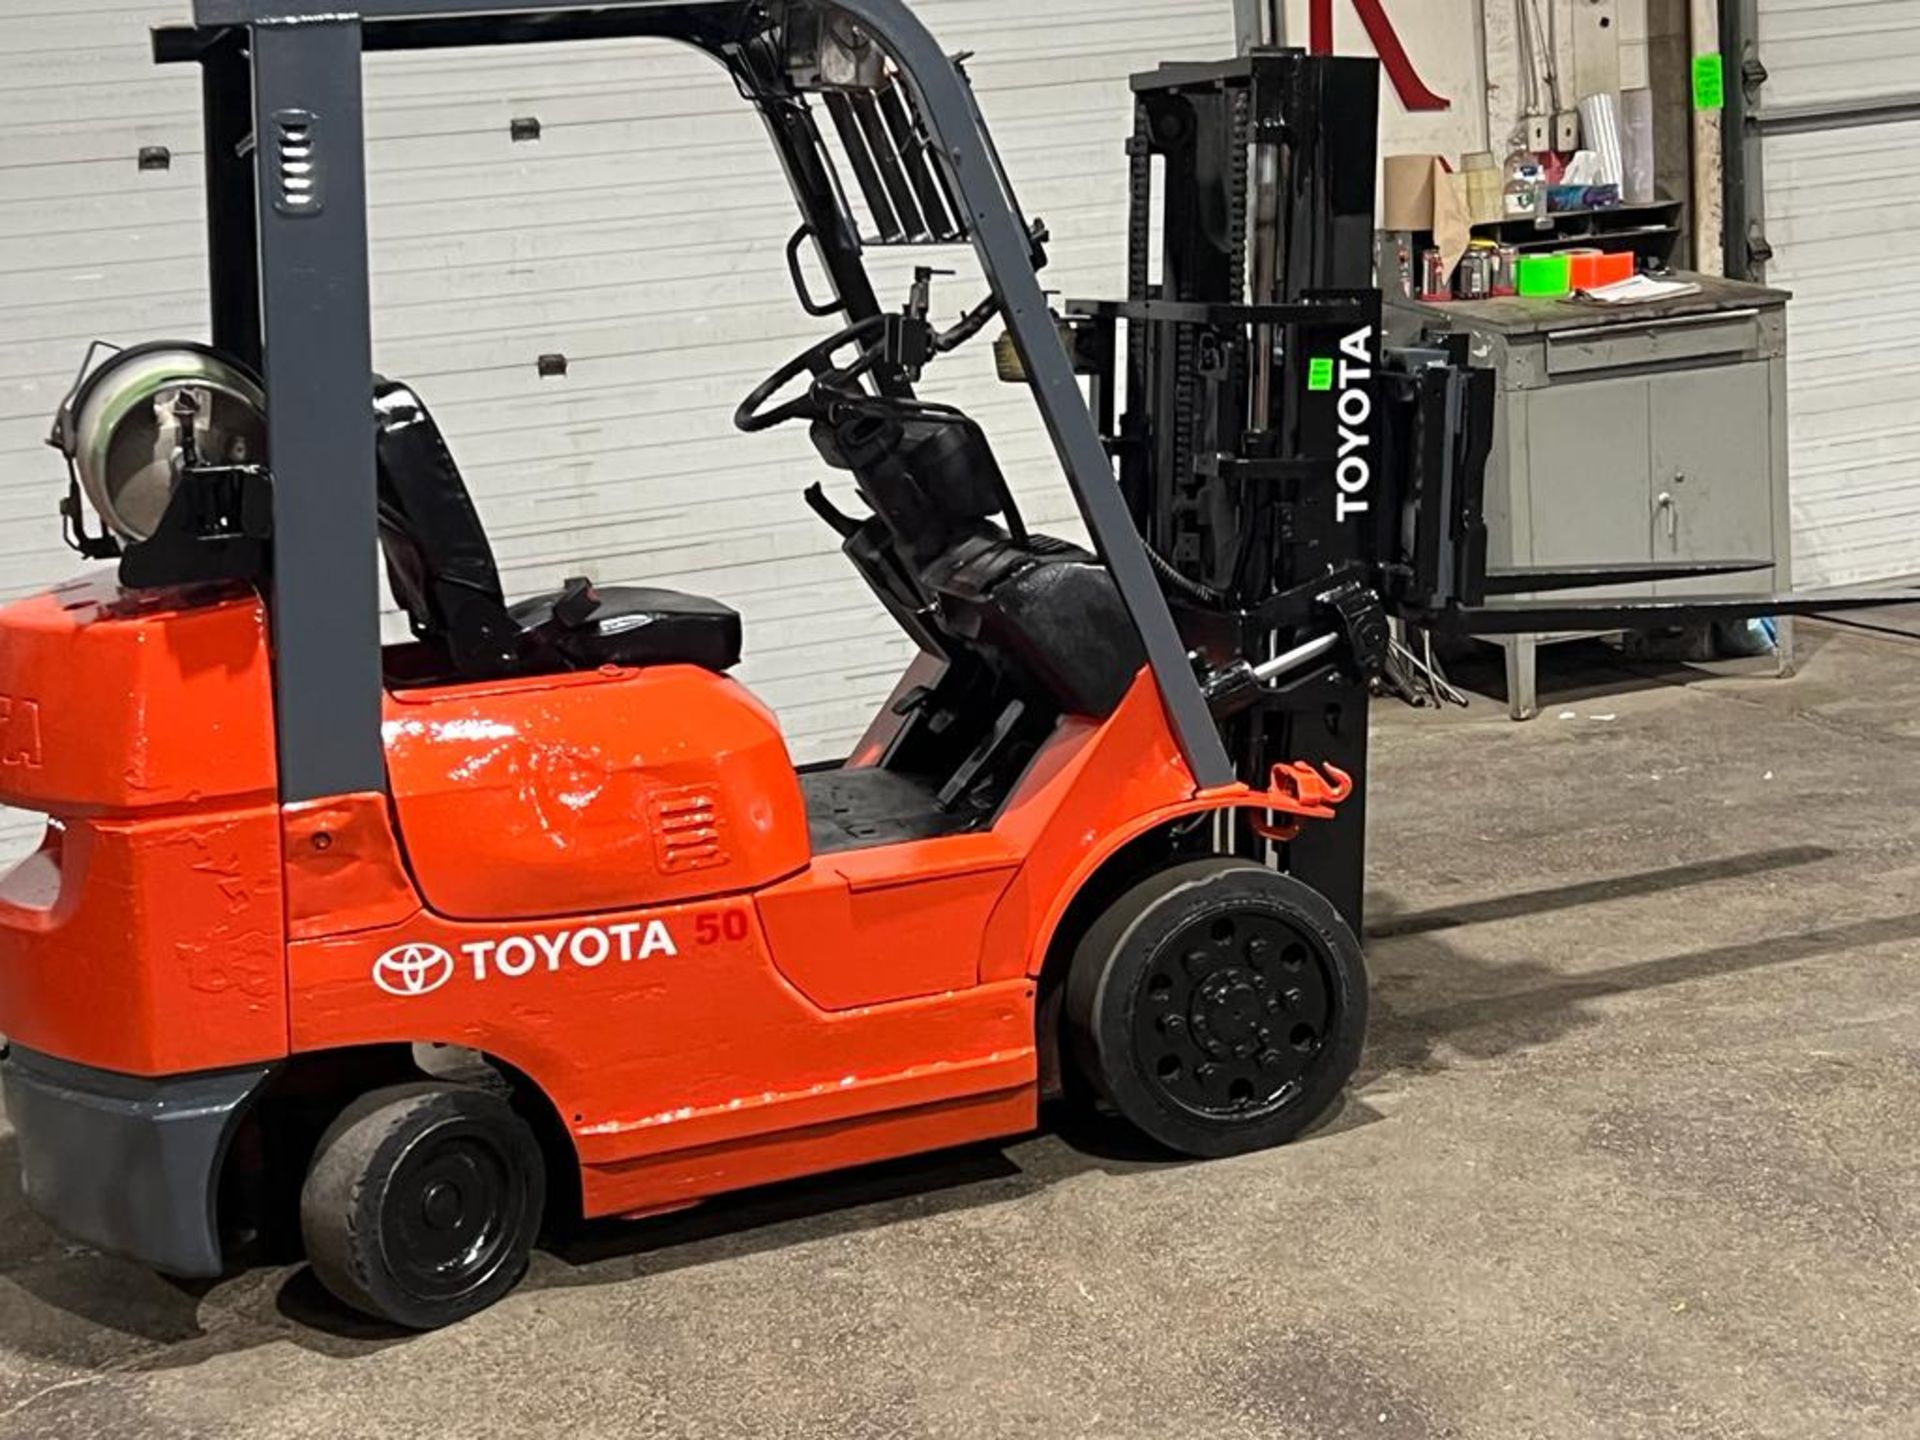 Toyota 5,000lbs Capacity Forklift LPG (propane) with Built On Scale and Trucker Mast - FREE CUSTOMS - Image 2 of 5